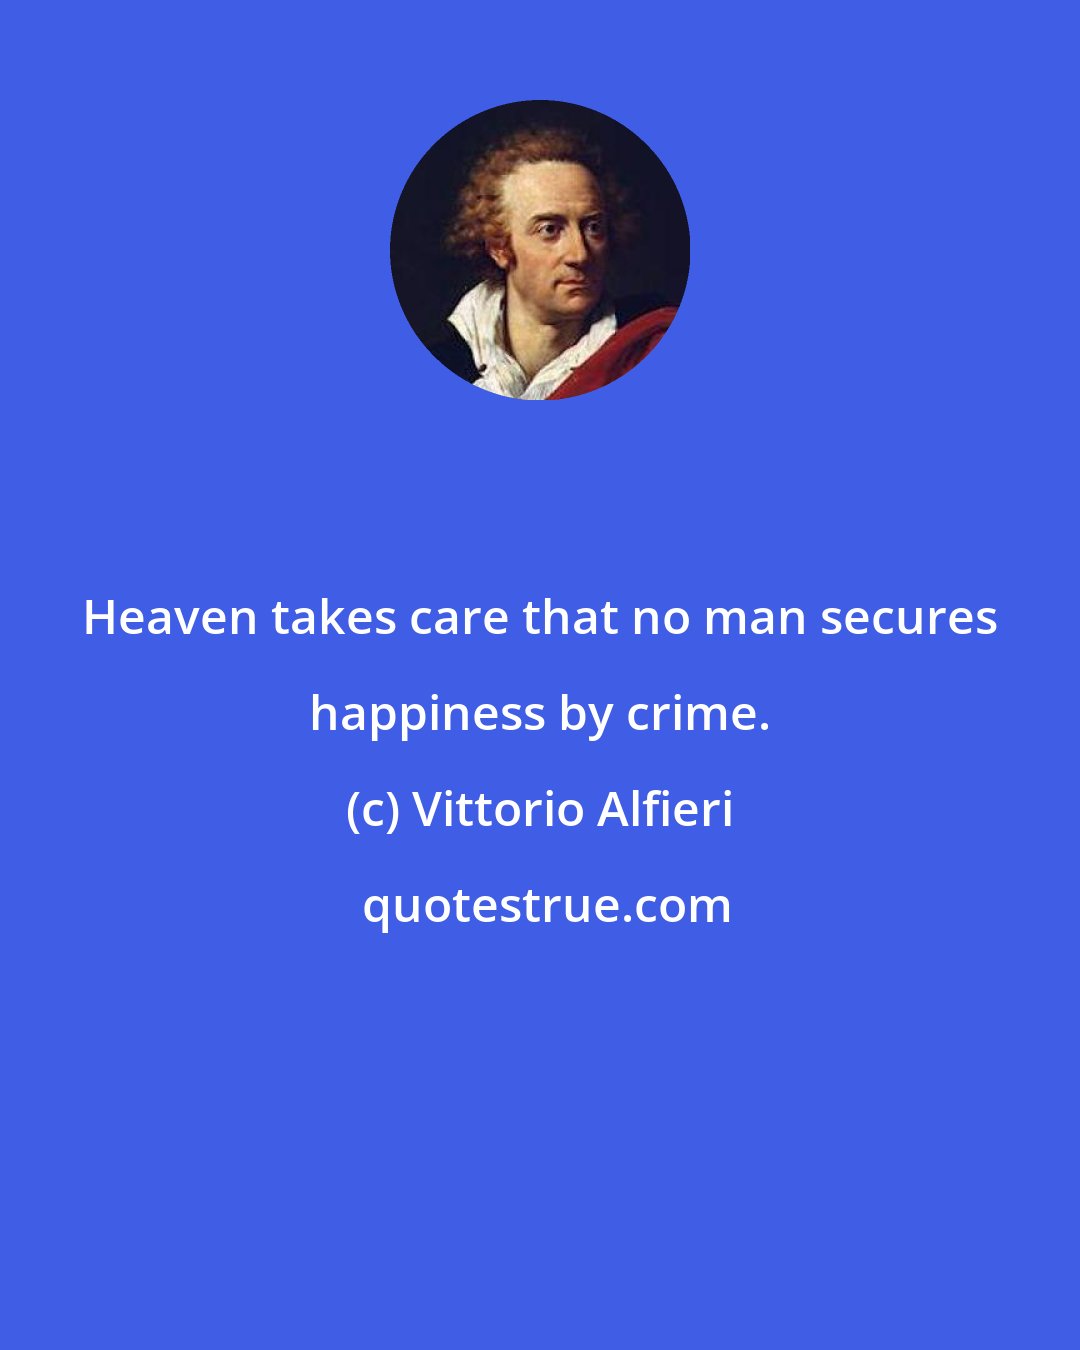 Vittorio Alfieri: Heaven takes care that no man secures happiness by crime.